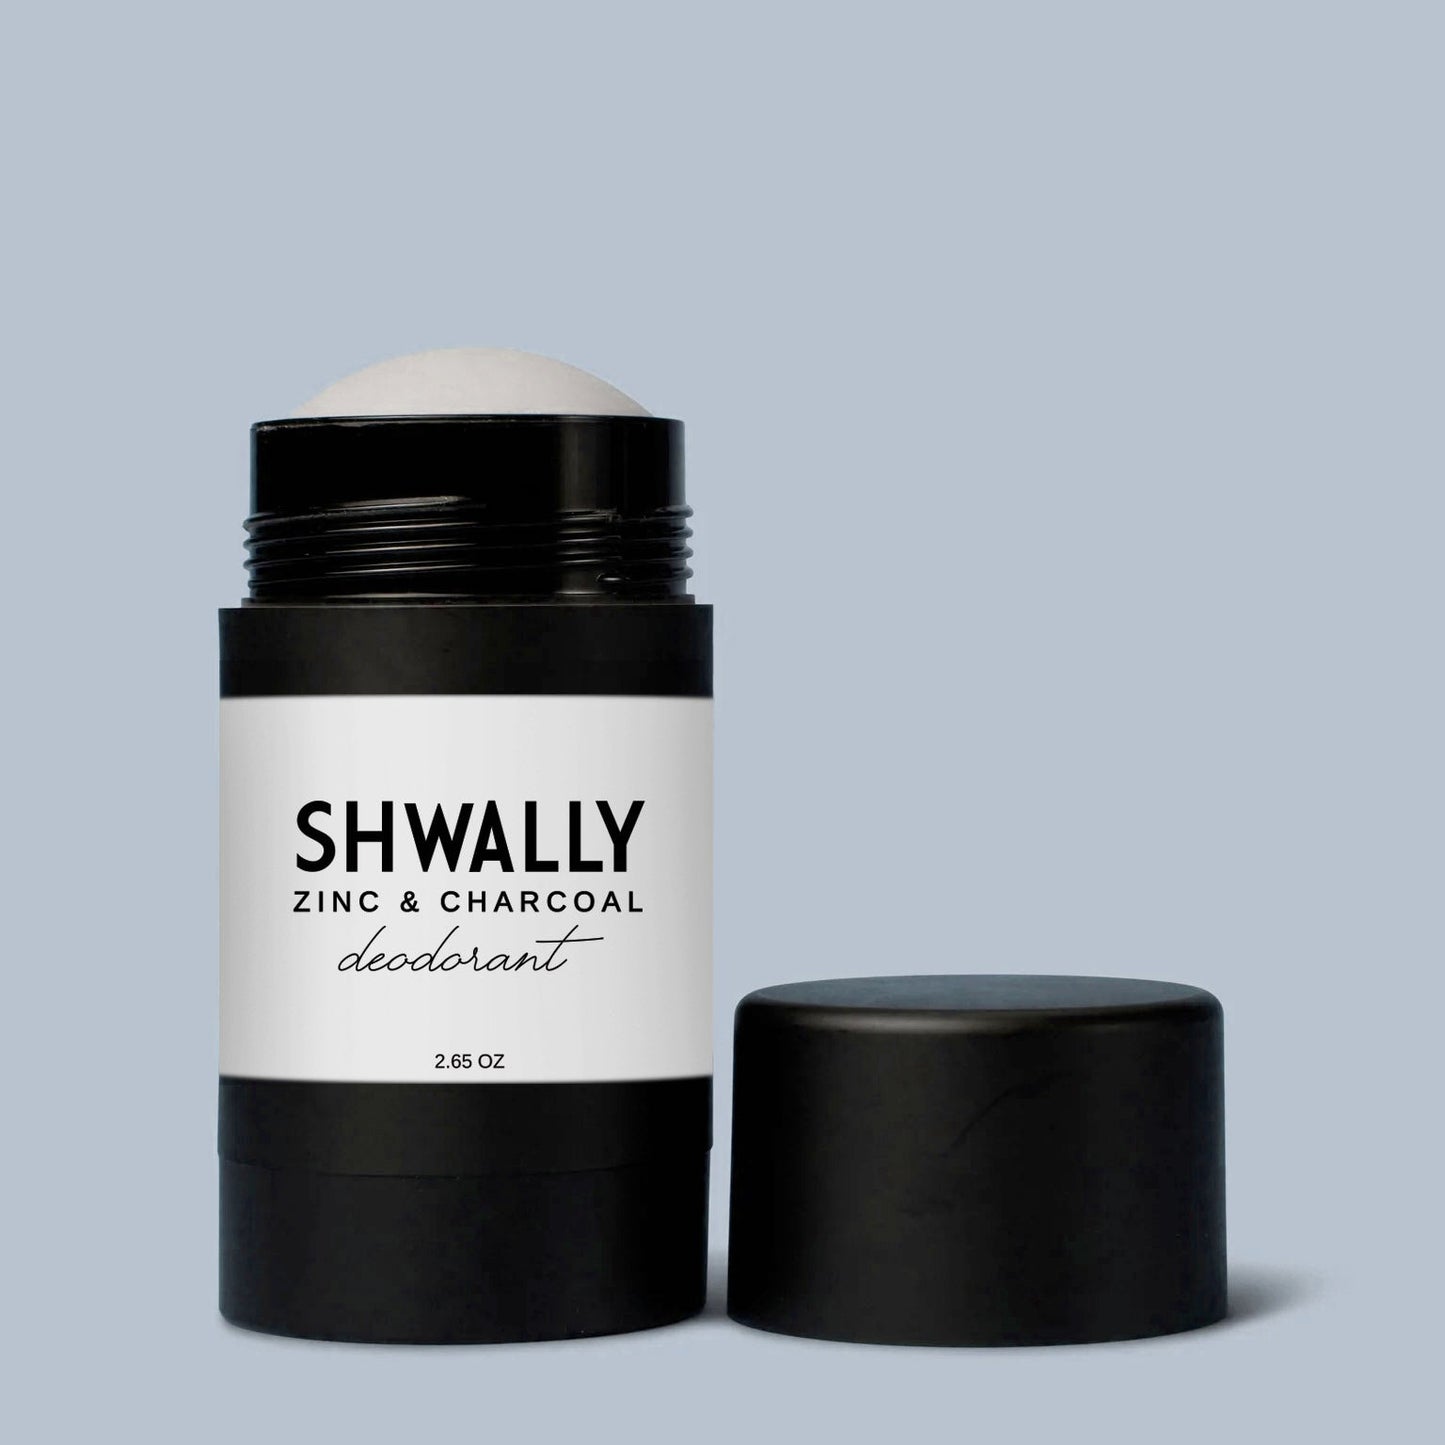 Shwally Zinc & Charcoal Deodorant by Shwally - For Home and Play